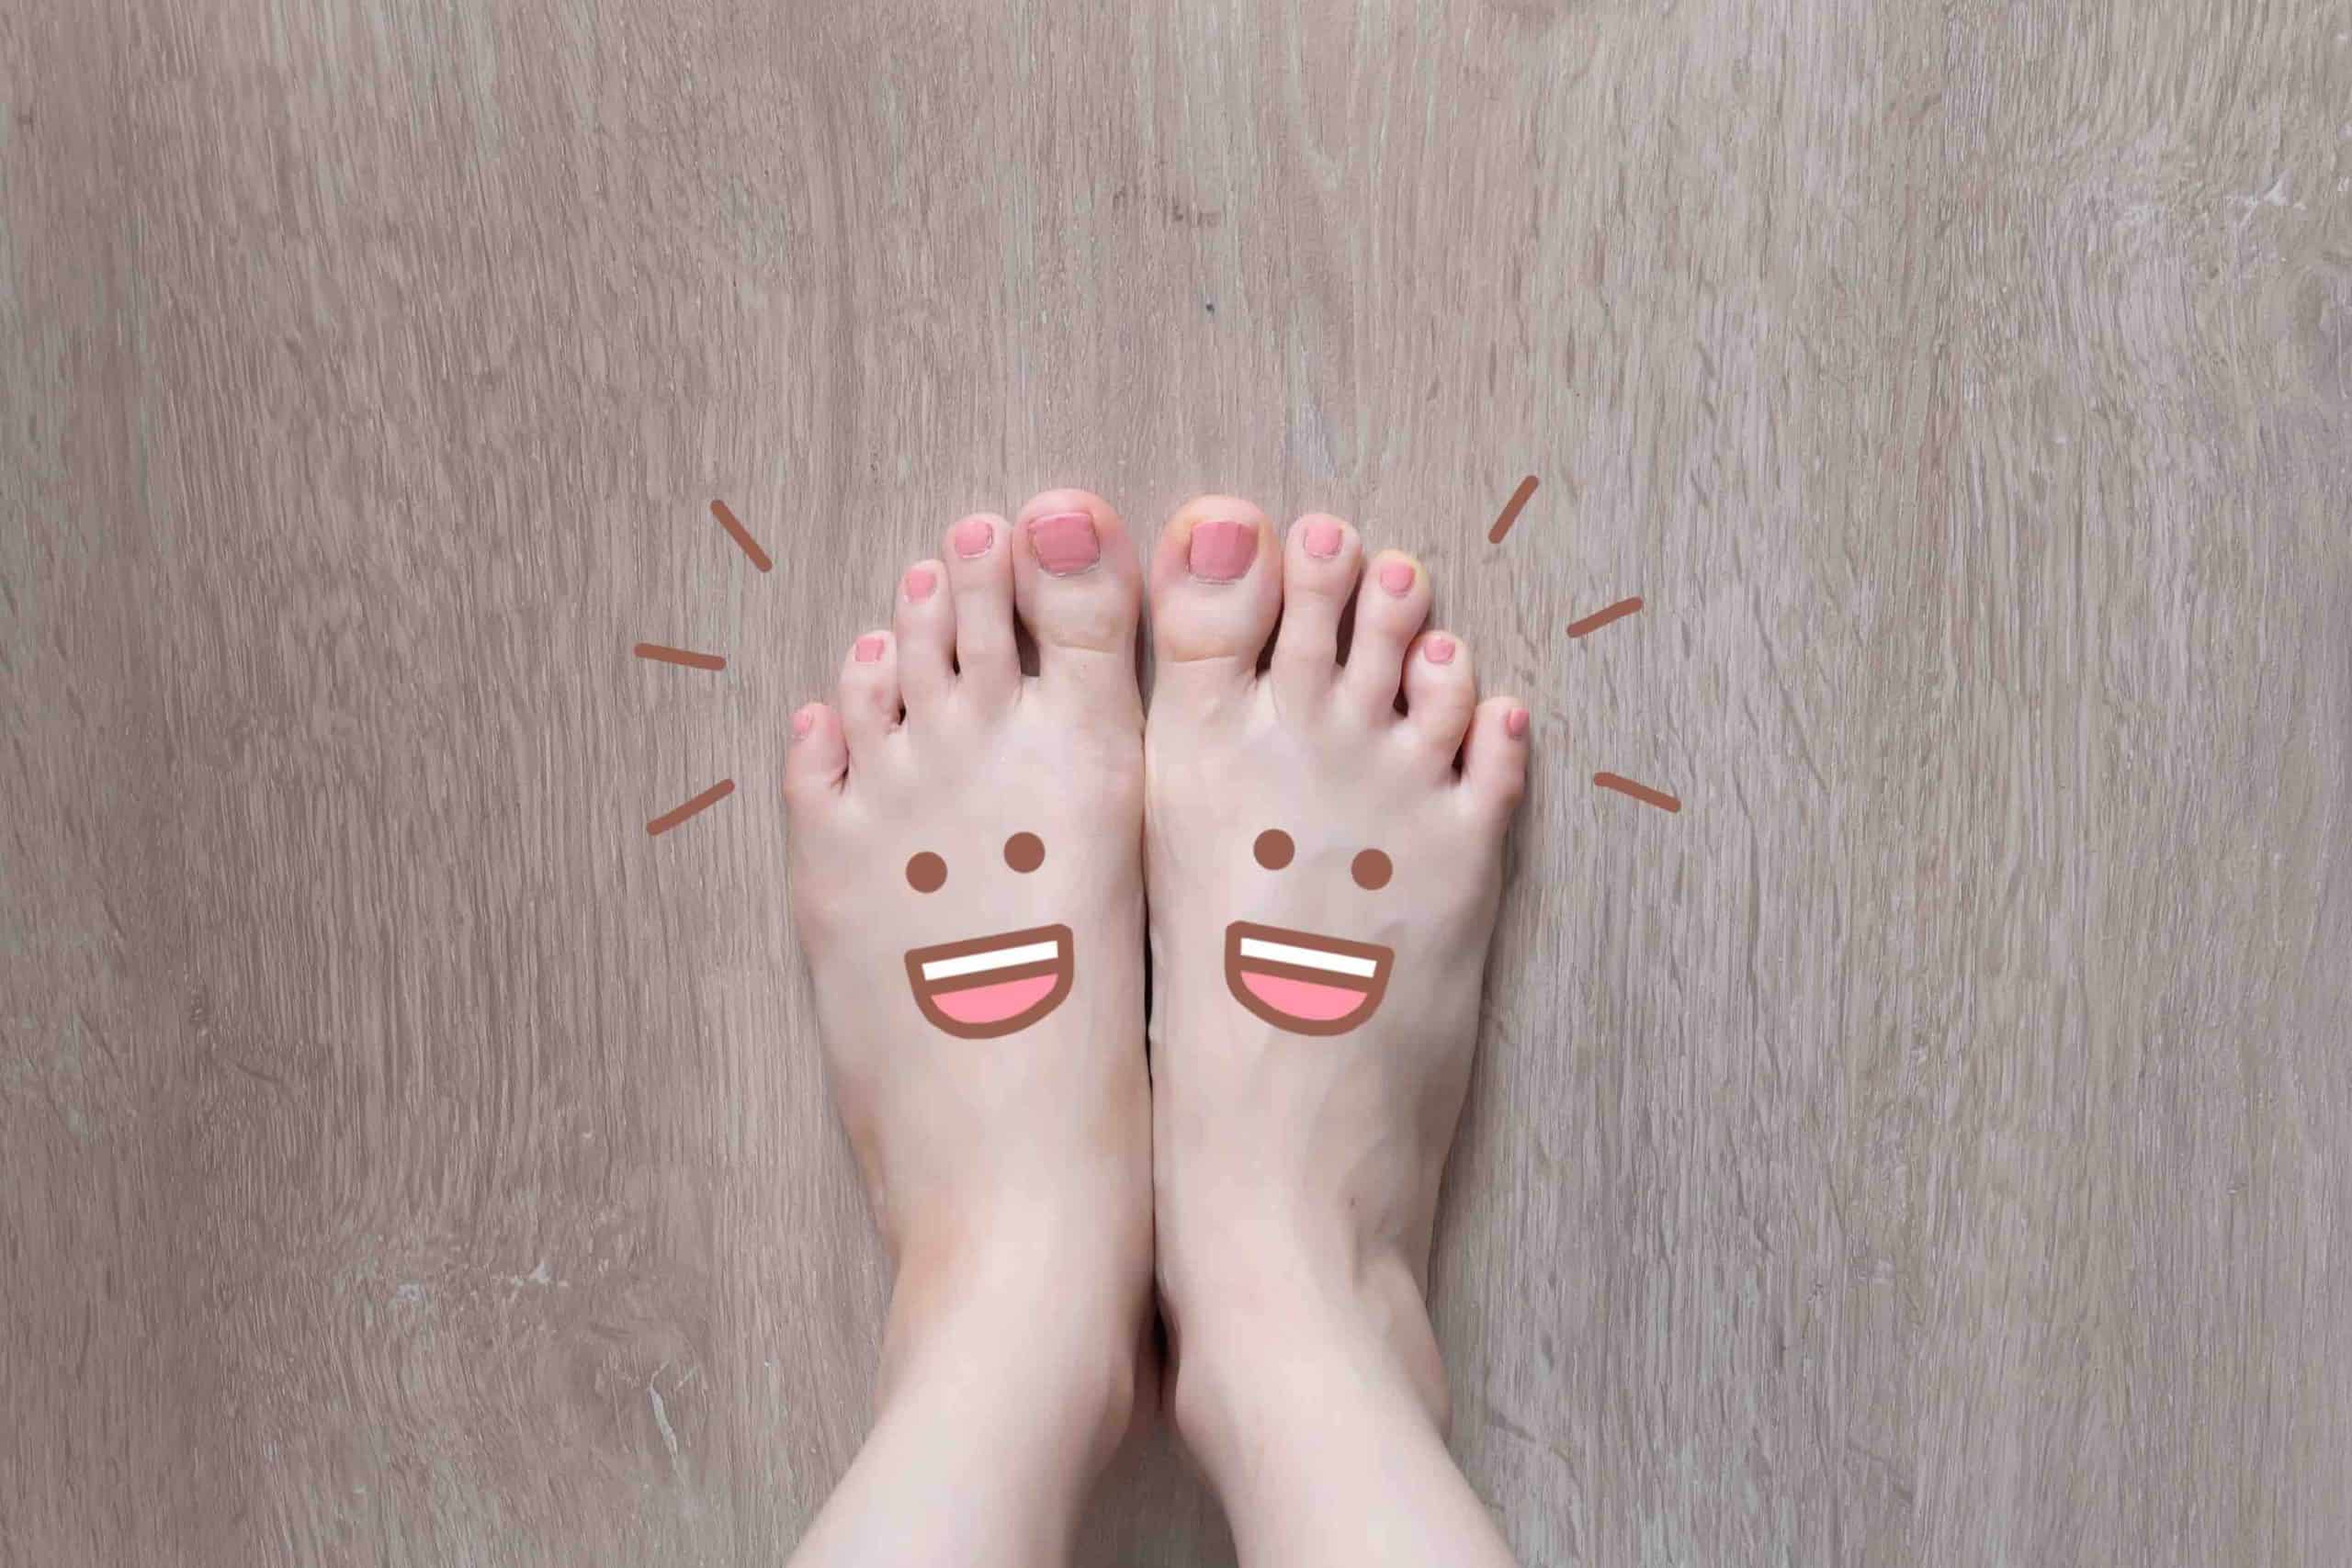 How to Sell Feet Pics Online: Ultimate Guide (2021)